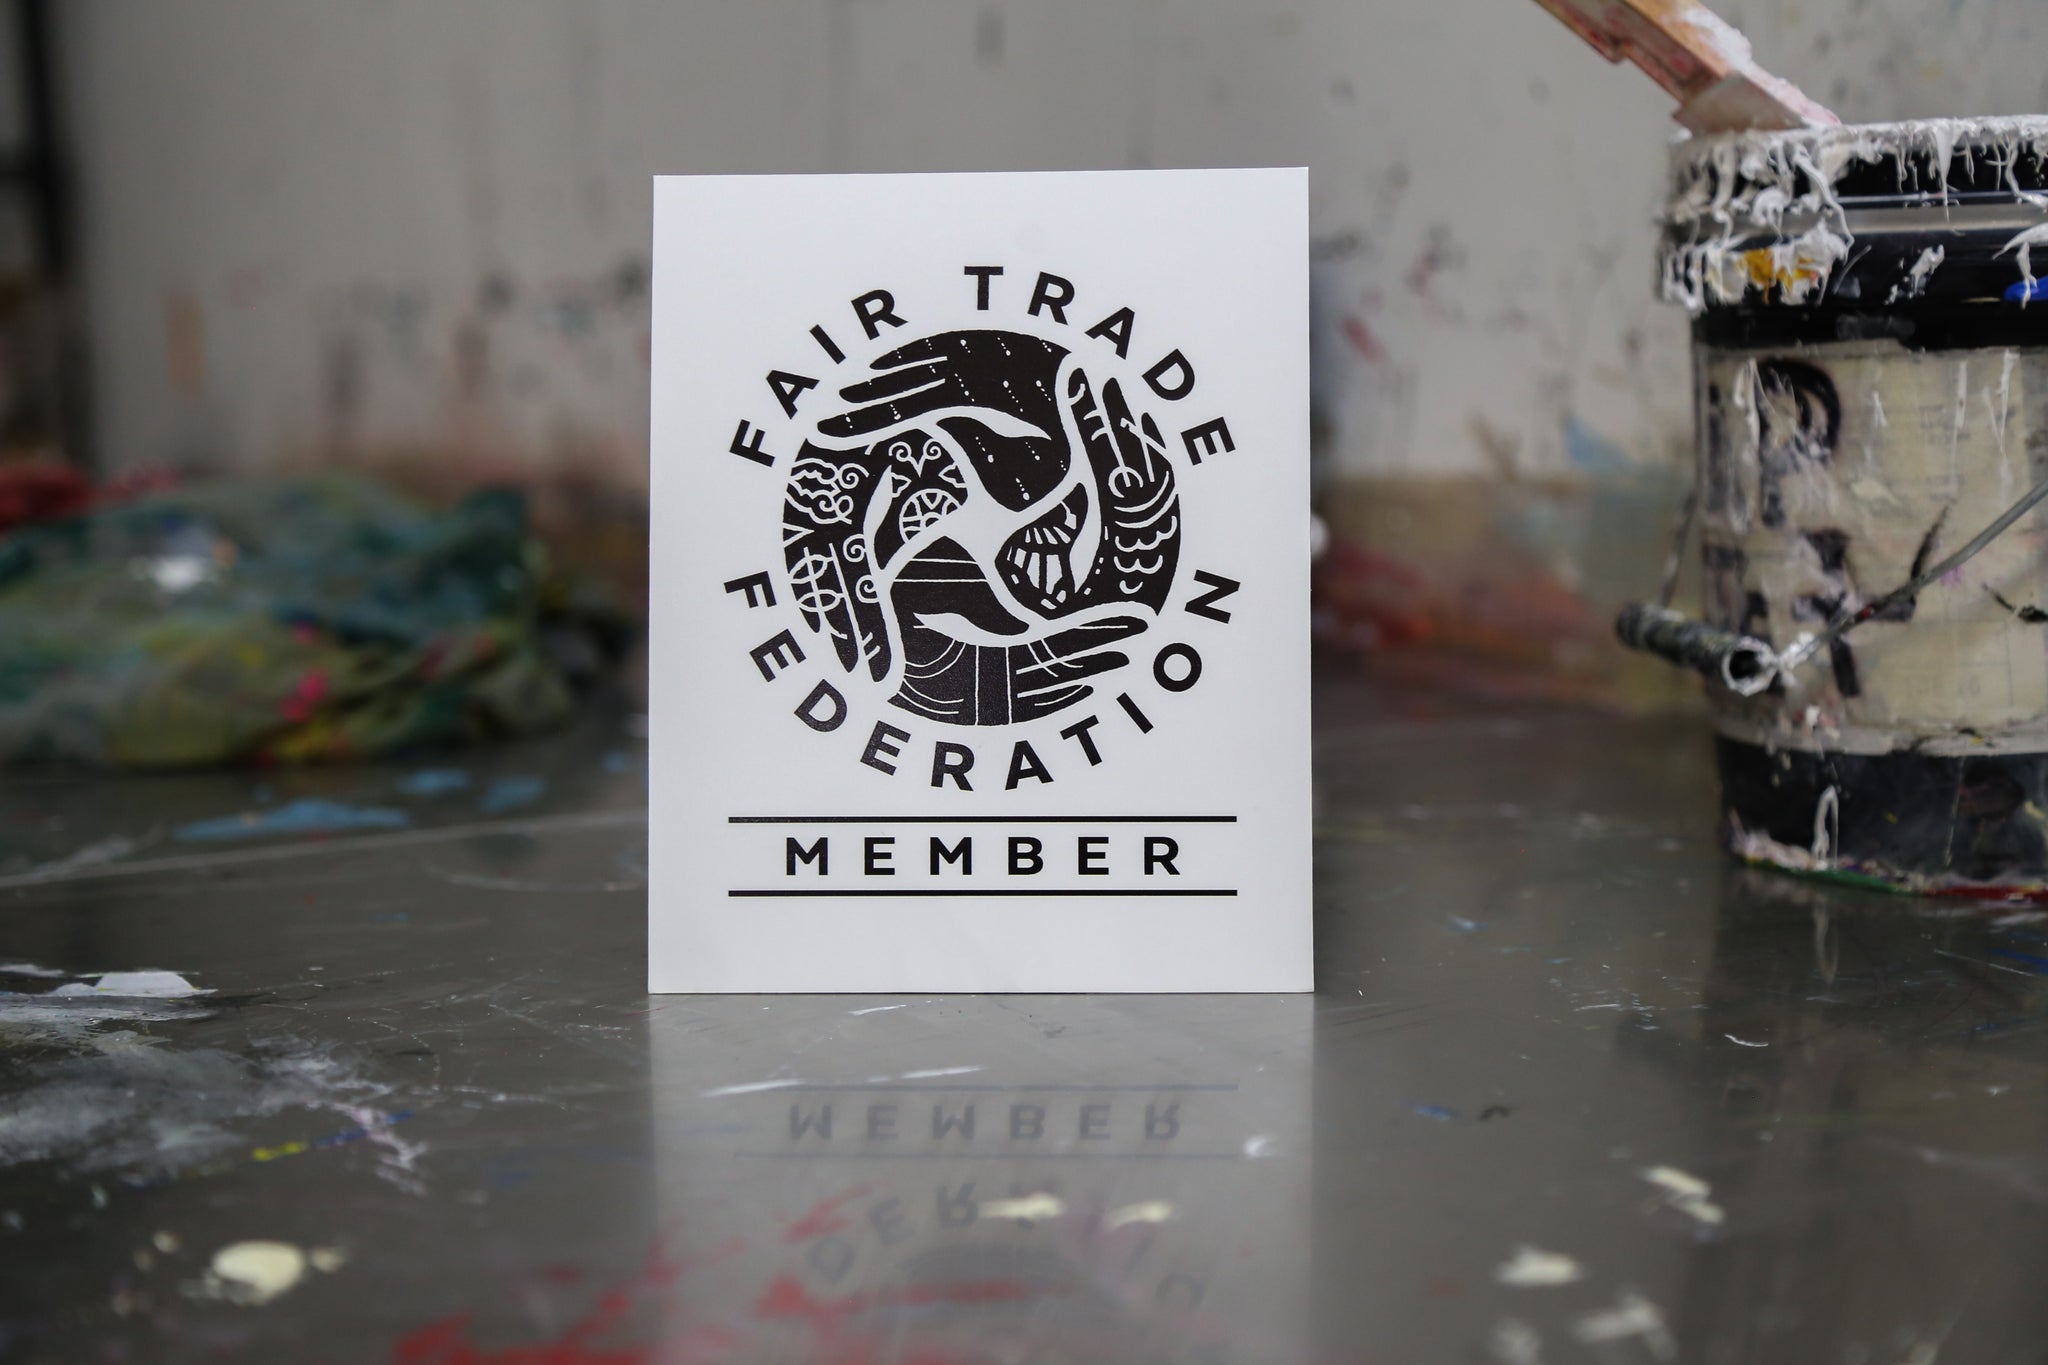 A Proud Member of the Fair Trade Federation